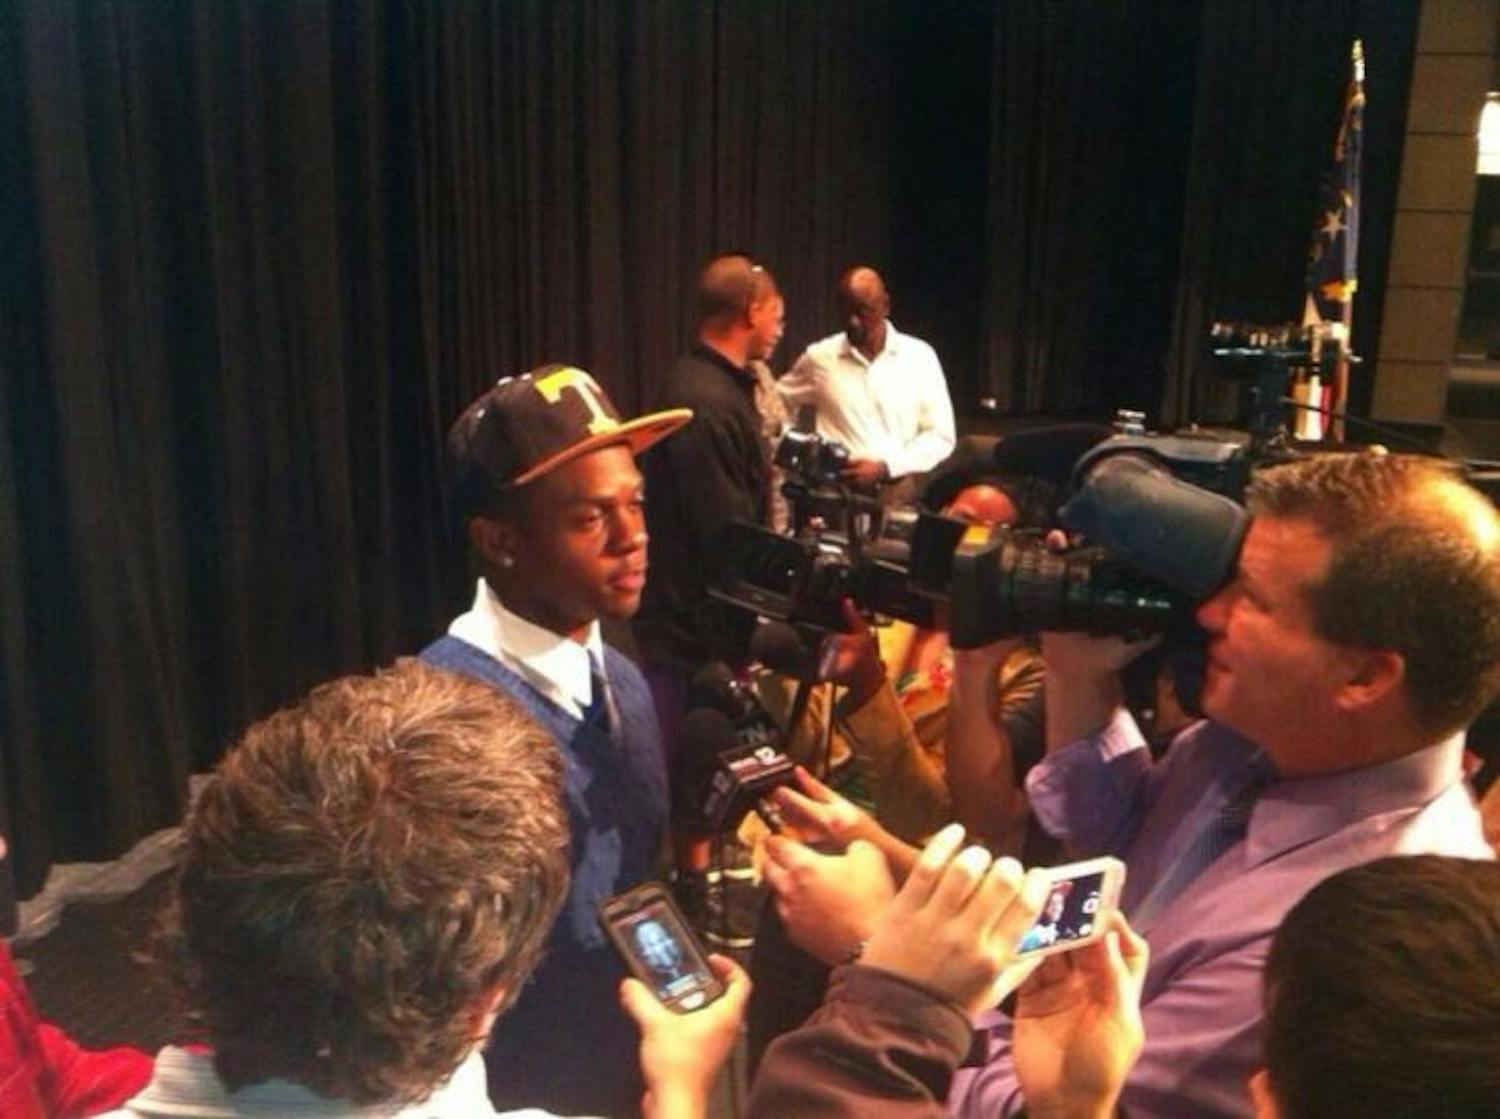 Four-star running back Derrell Scott is interviewed by reporters after choosing Tennessee over Florida.